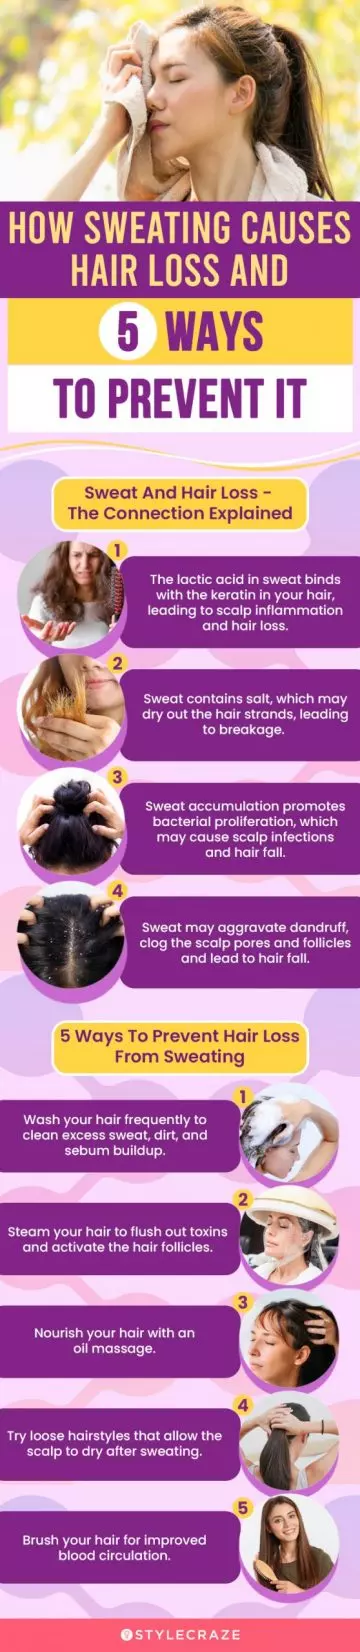 how sweating causes hair loss and 5 ways to prevent it (infographic)